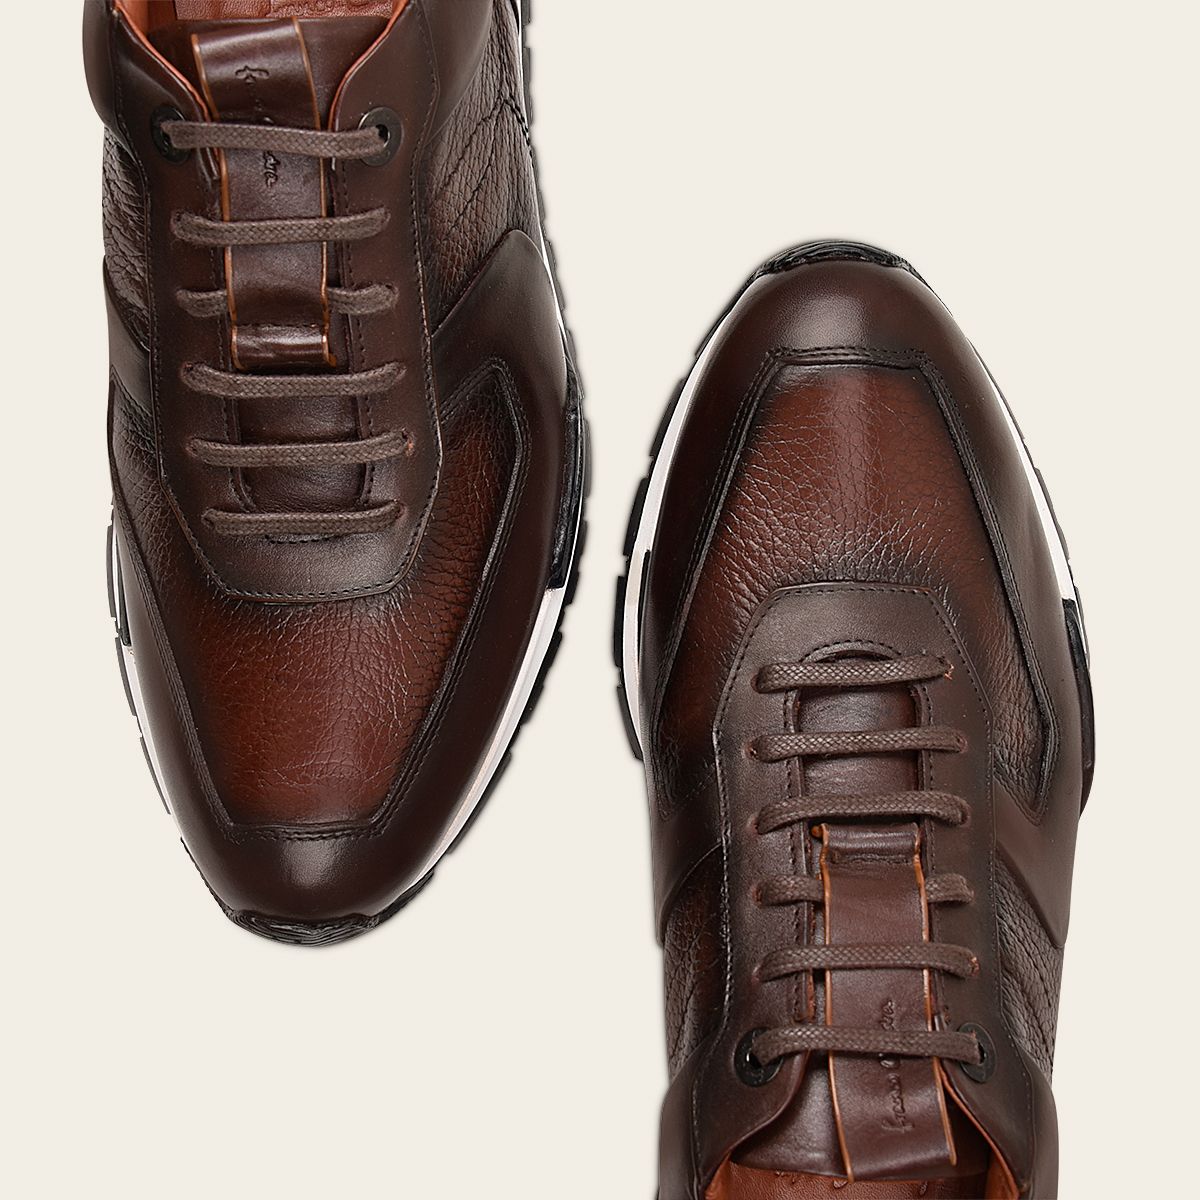 Brown deer leather sneakers, deer and bovine leather with laces